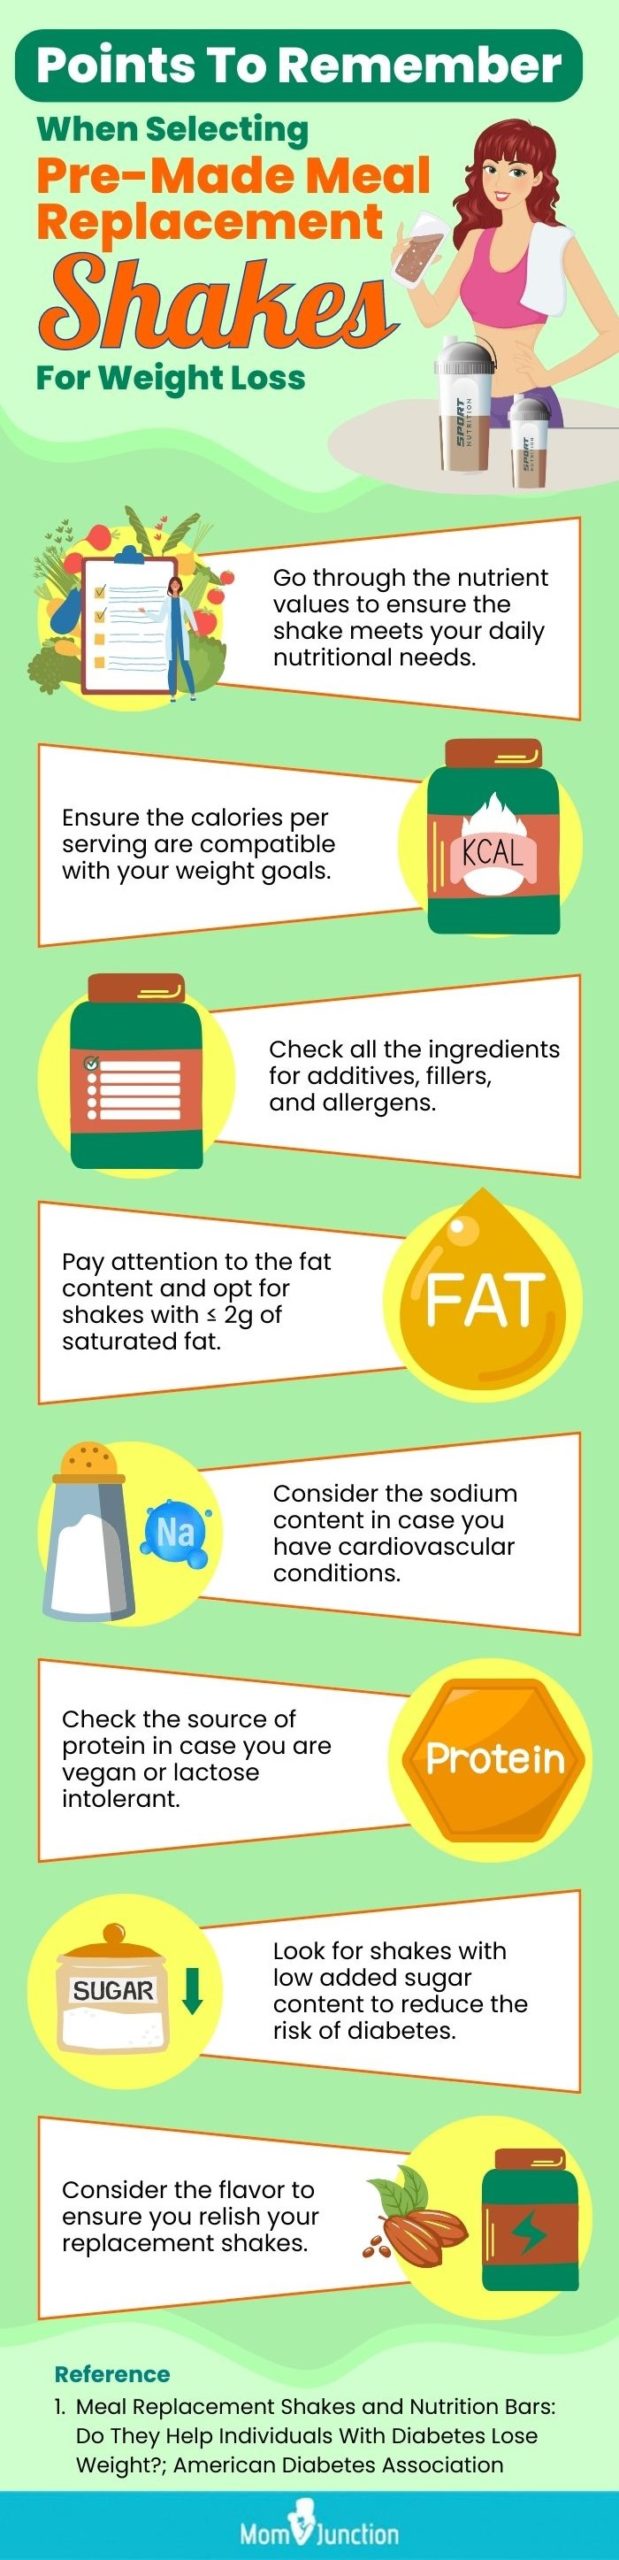 Points To Remember When Selecting Pre-Made Meal Replacement Shakes For Weight Loss (infographic)